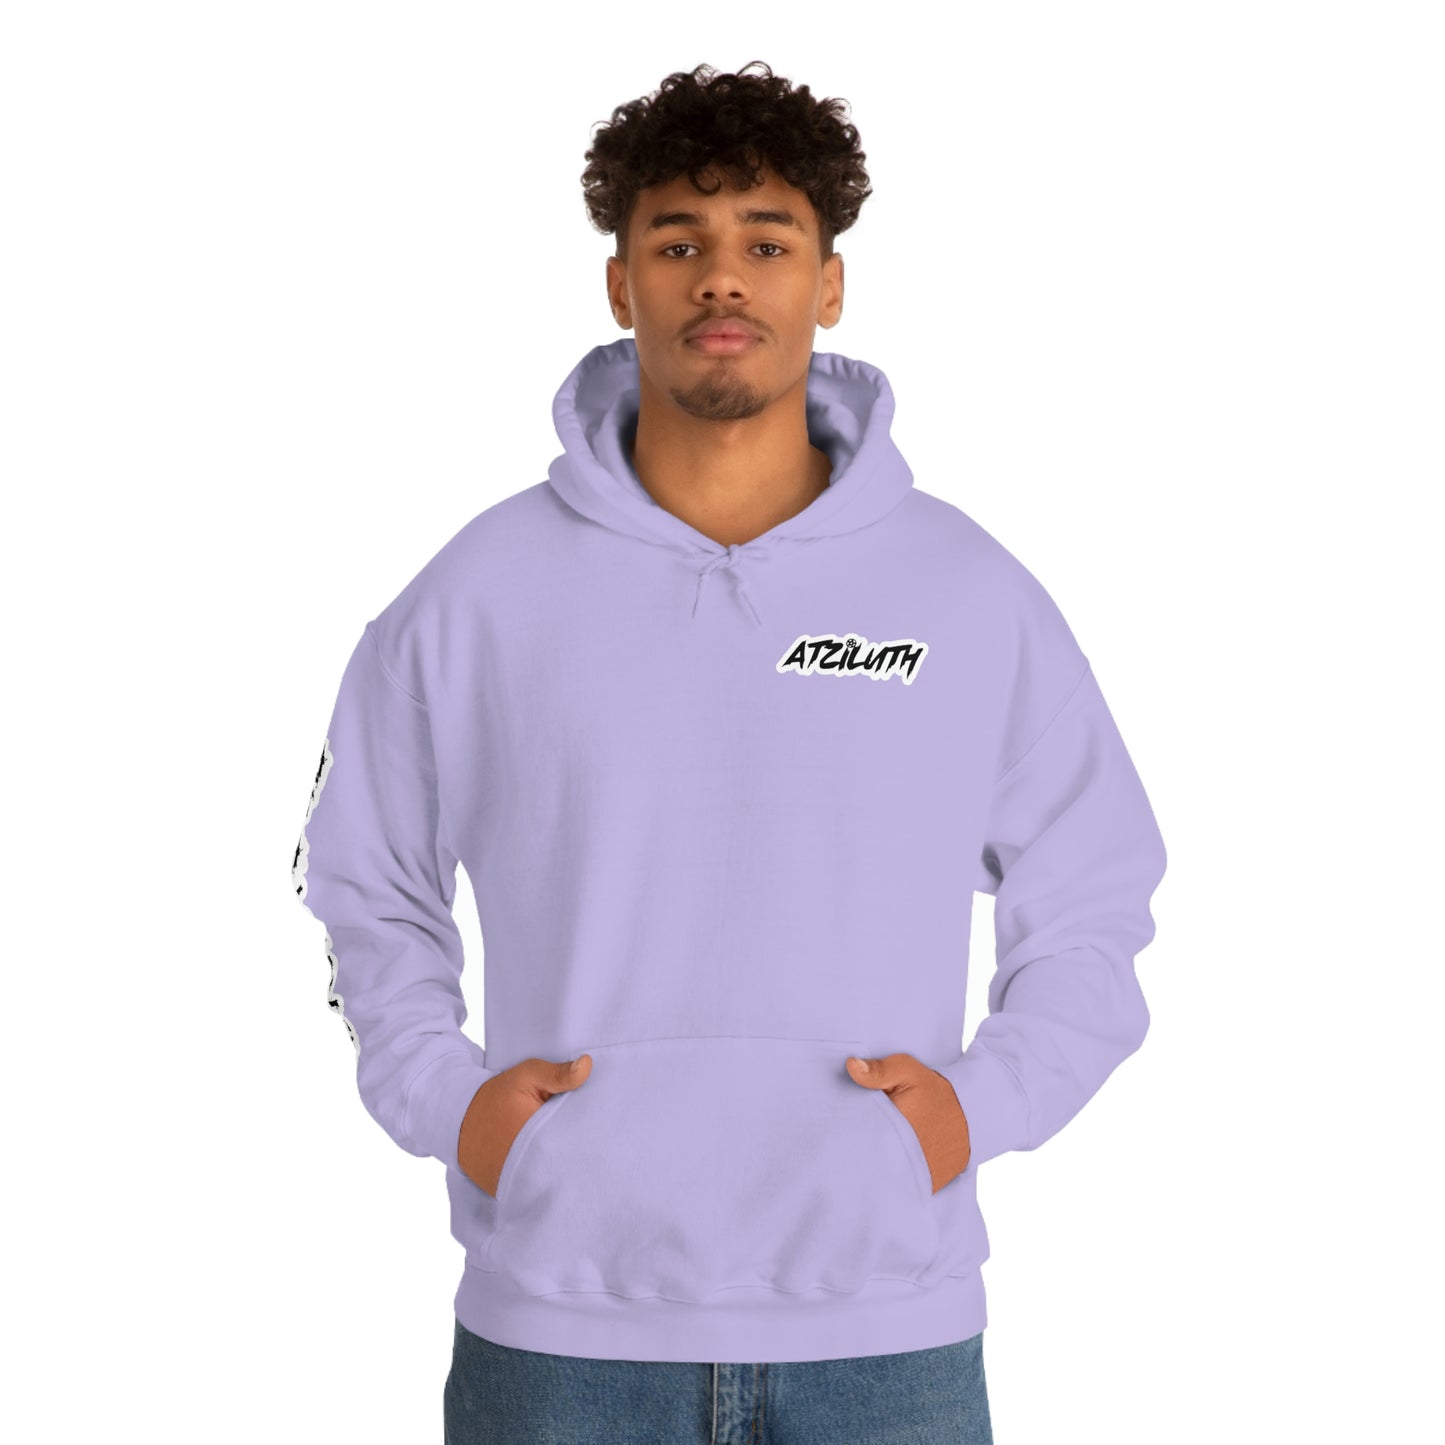 Atziluth Gallery " The Trap is Ded " Hoodie